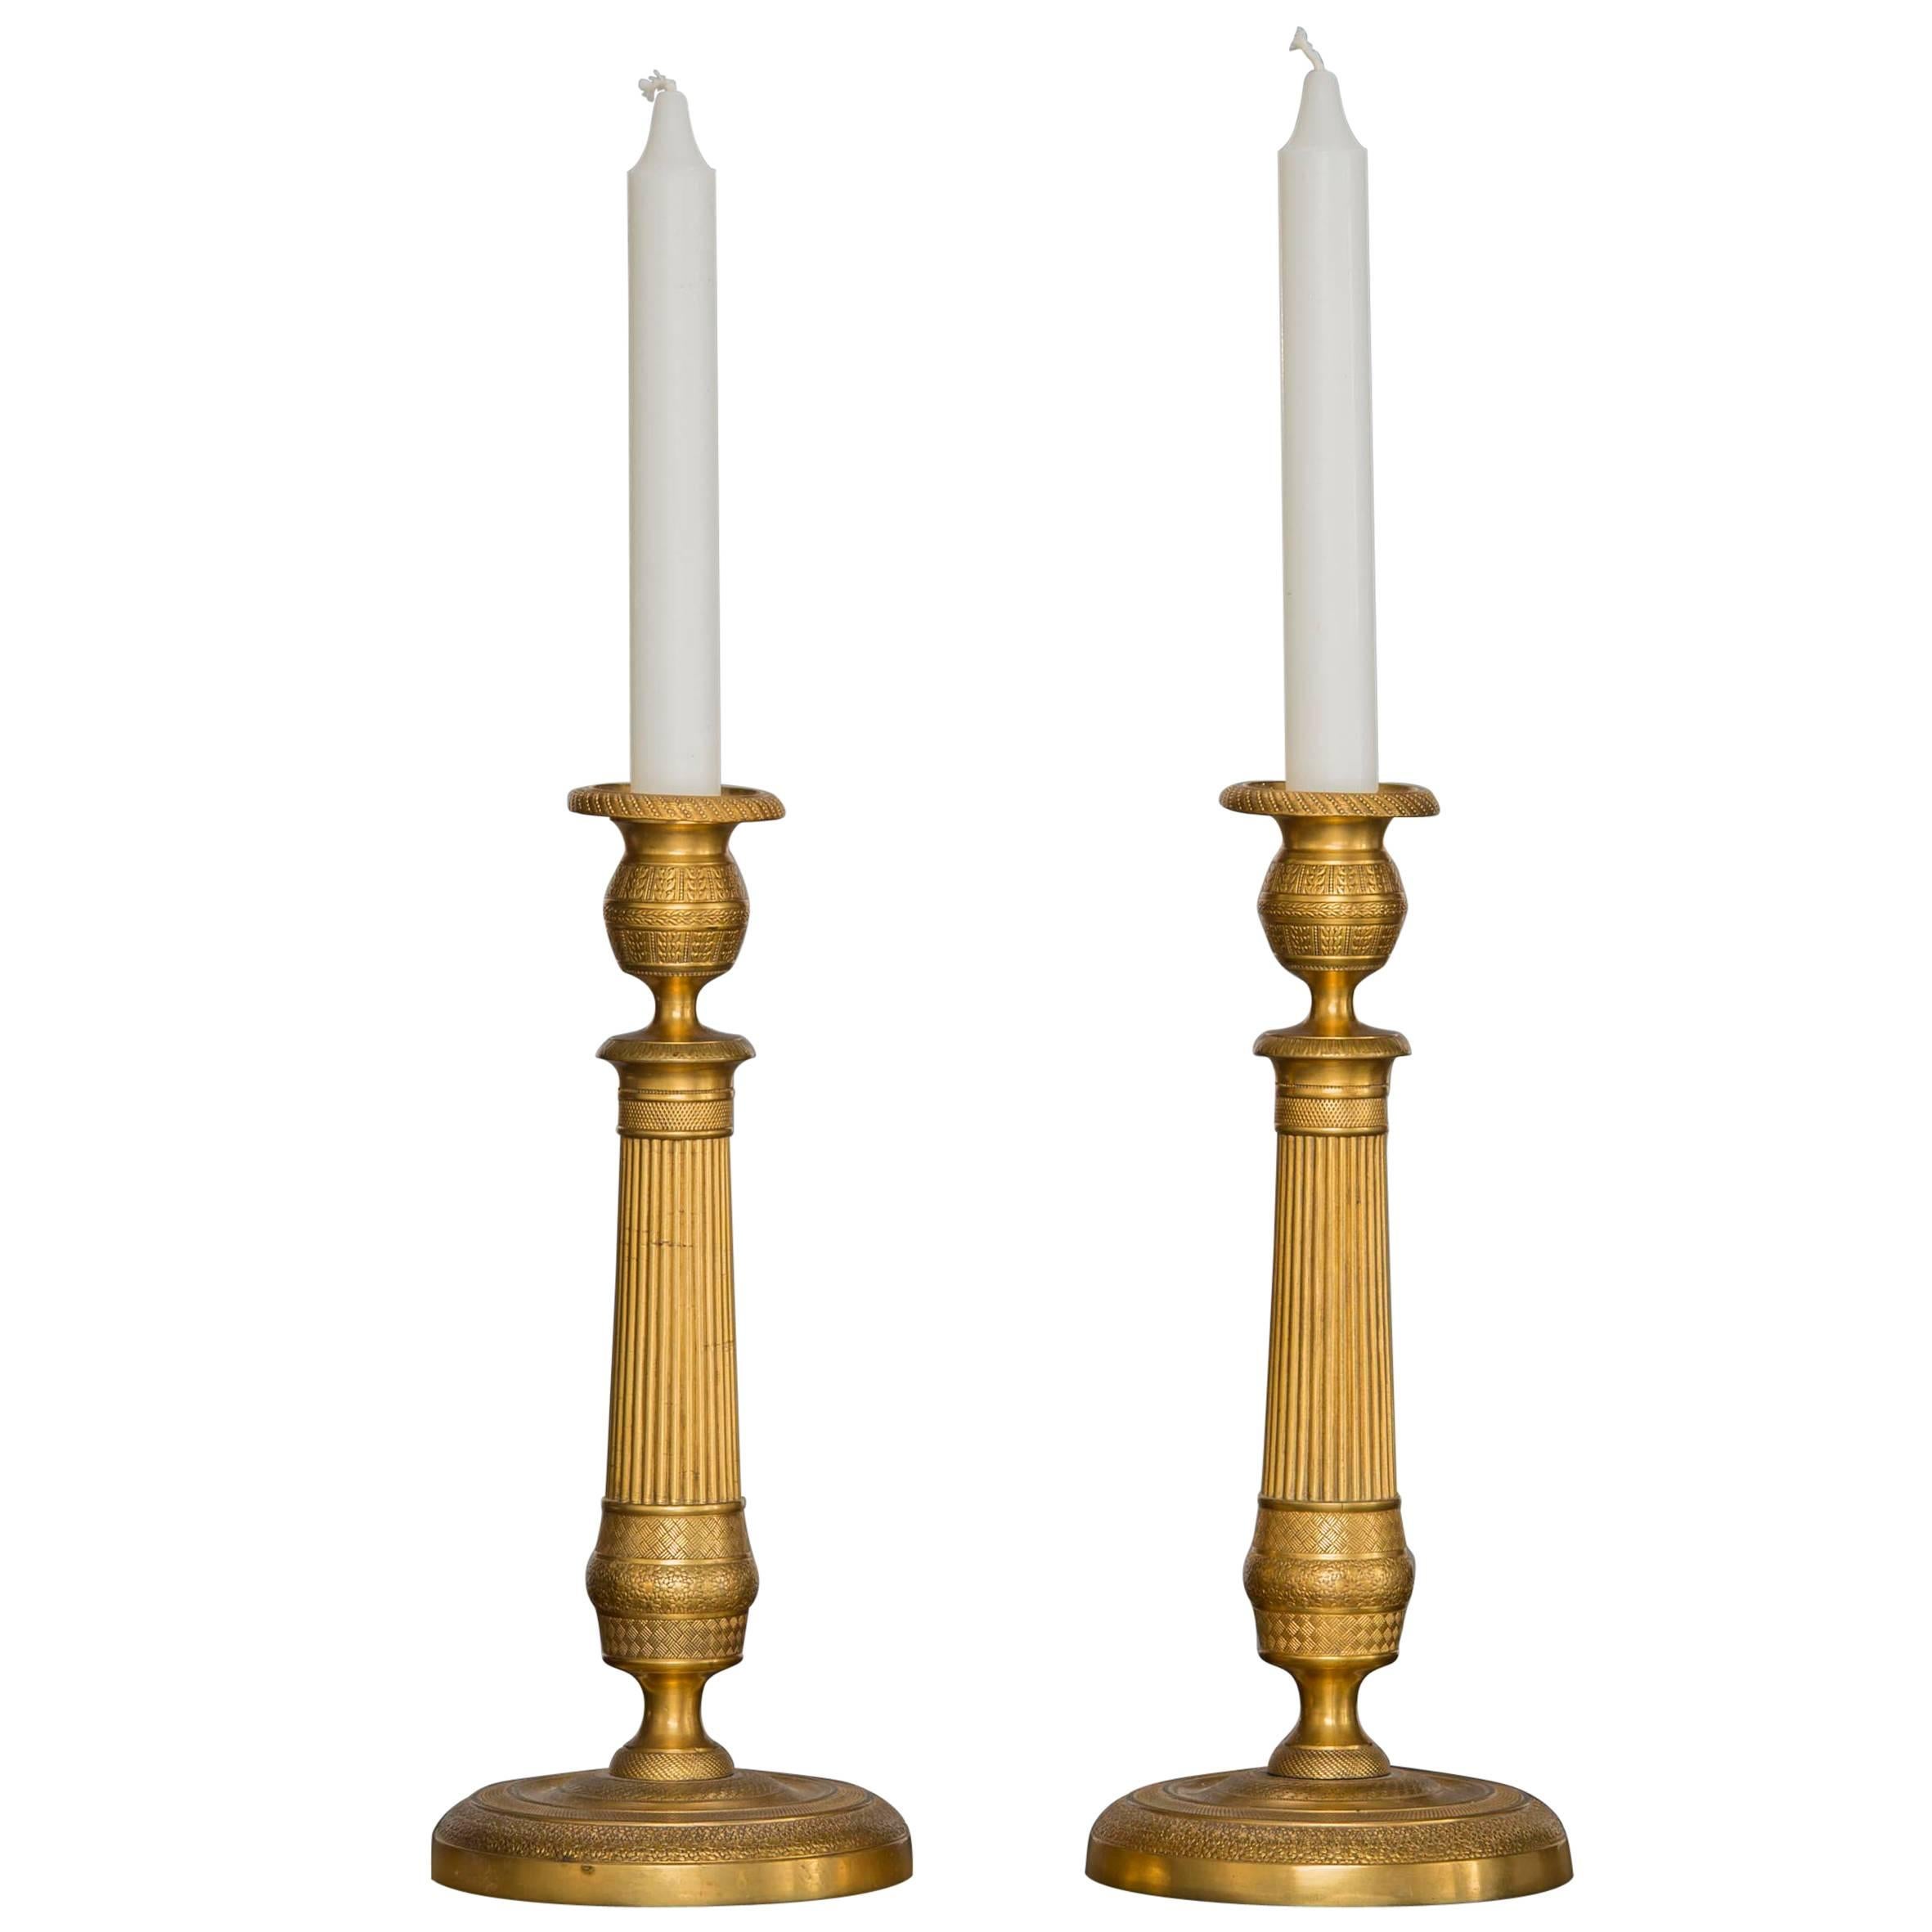 Pair of French Gilded Bronze Empire Candlesticks